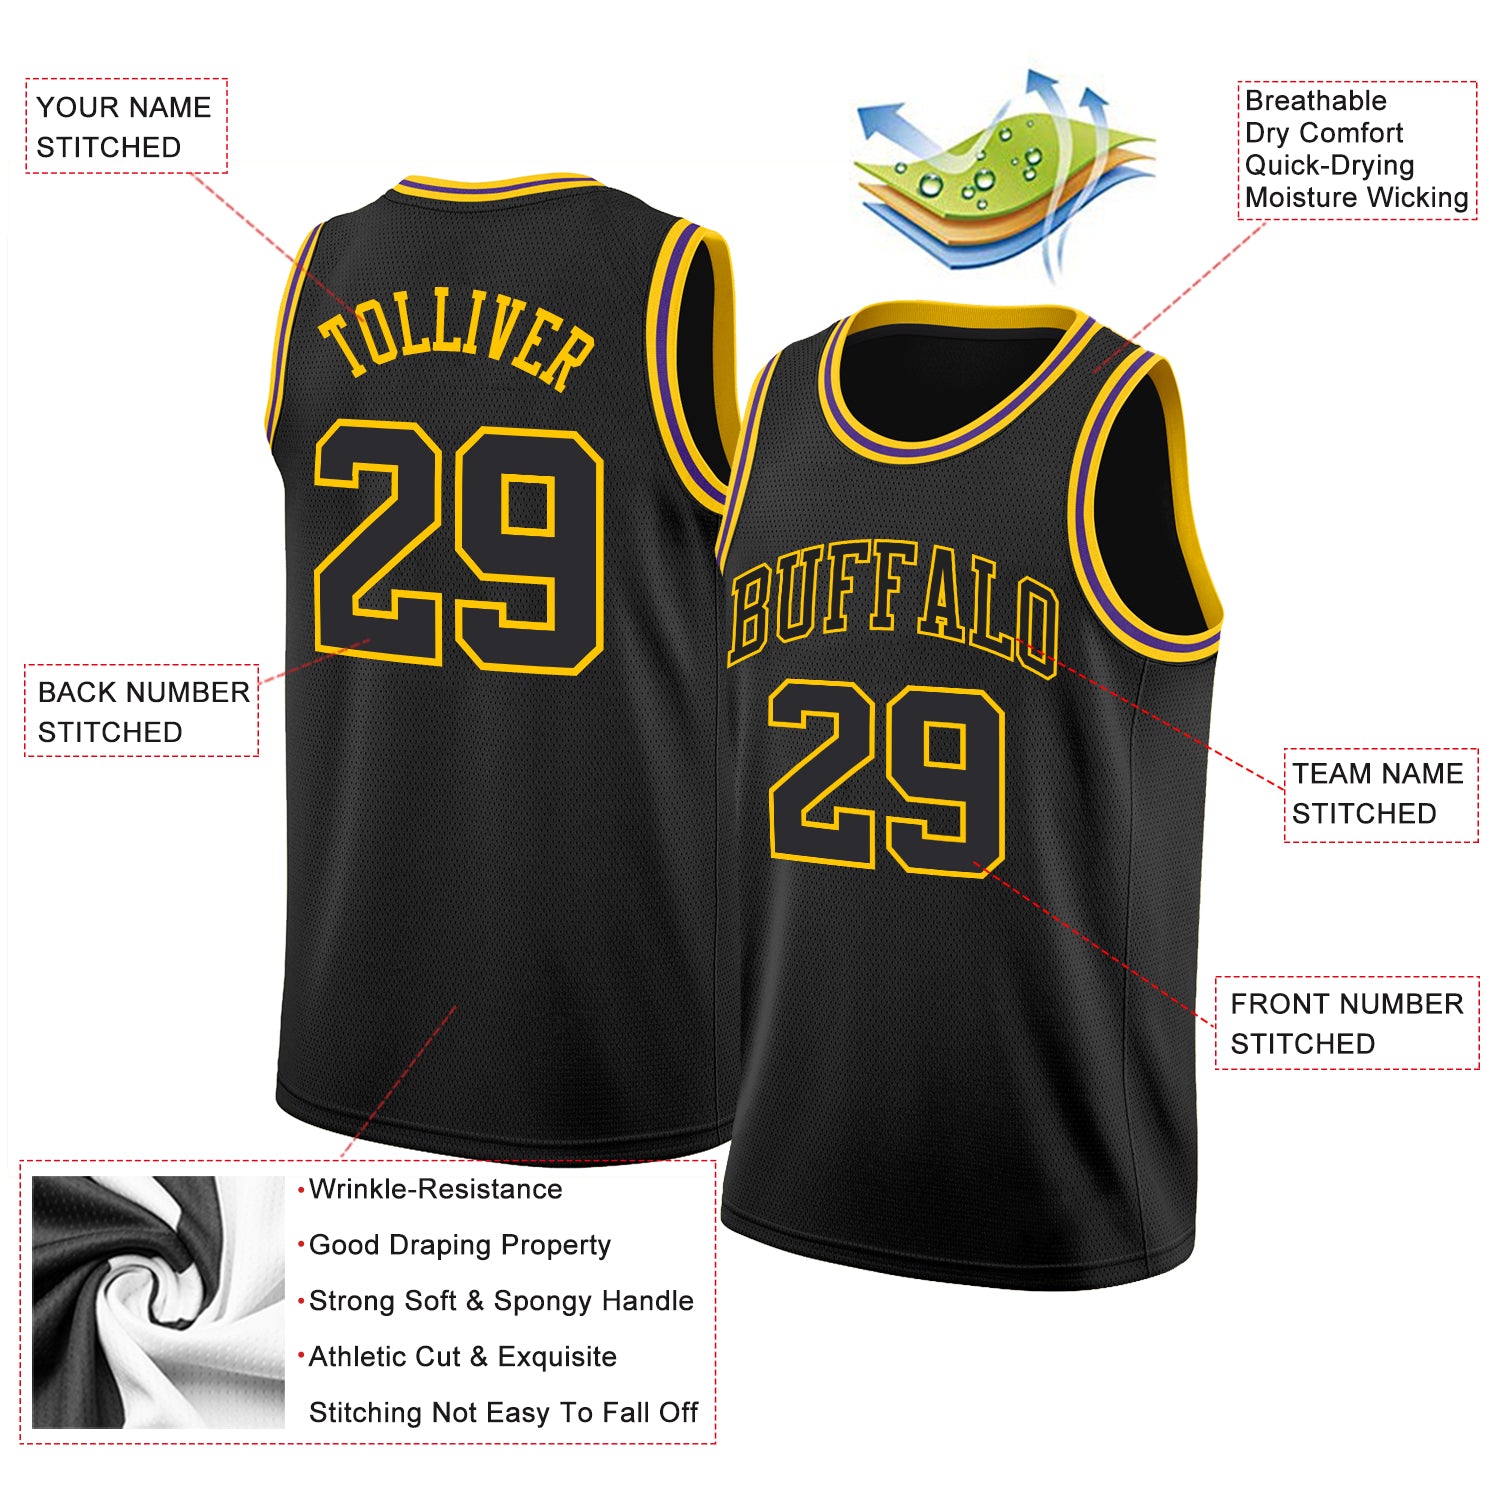 Wholesale golden state warriors jersey For Comfortable Sportswear 